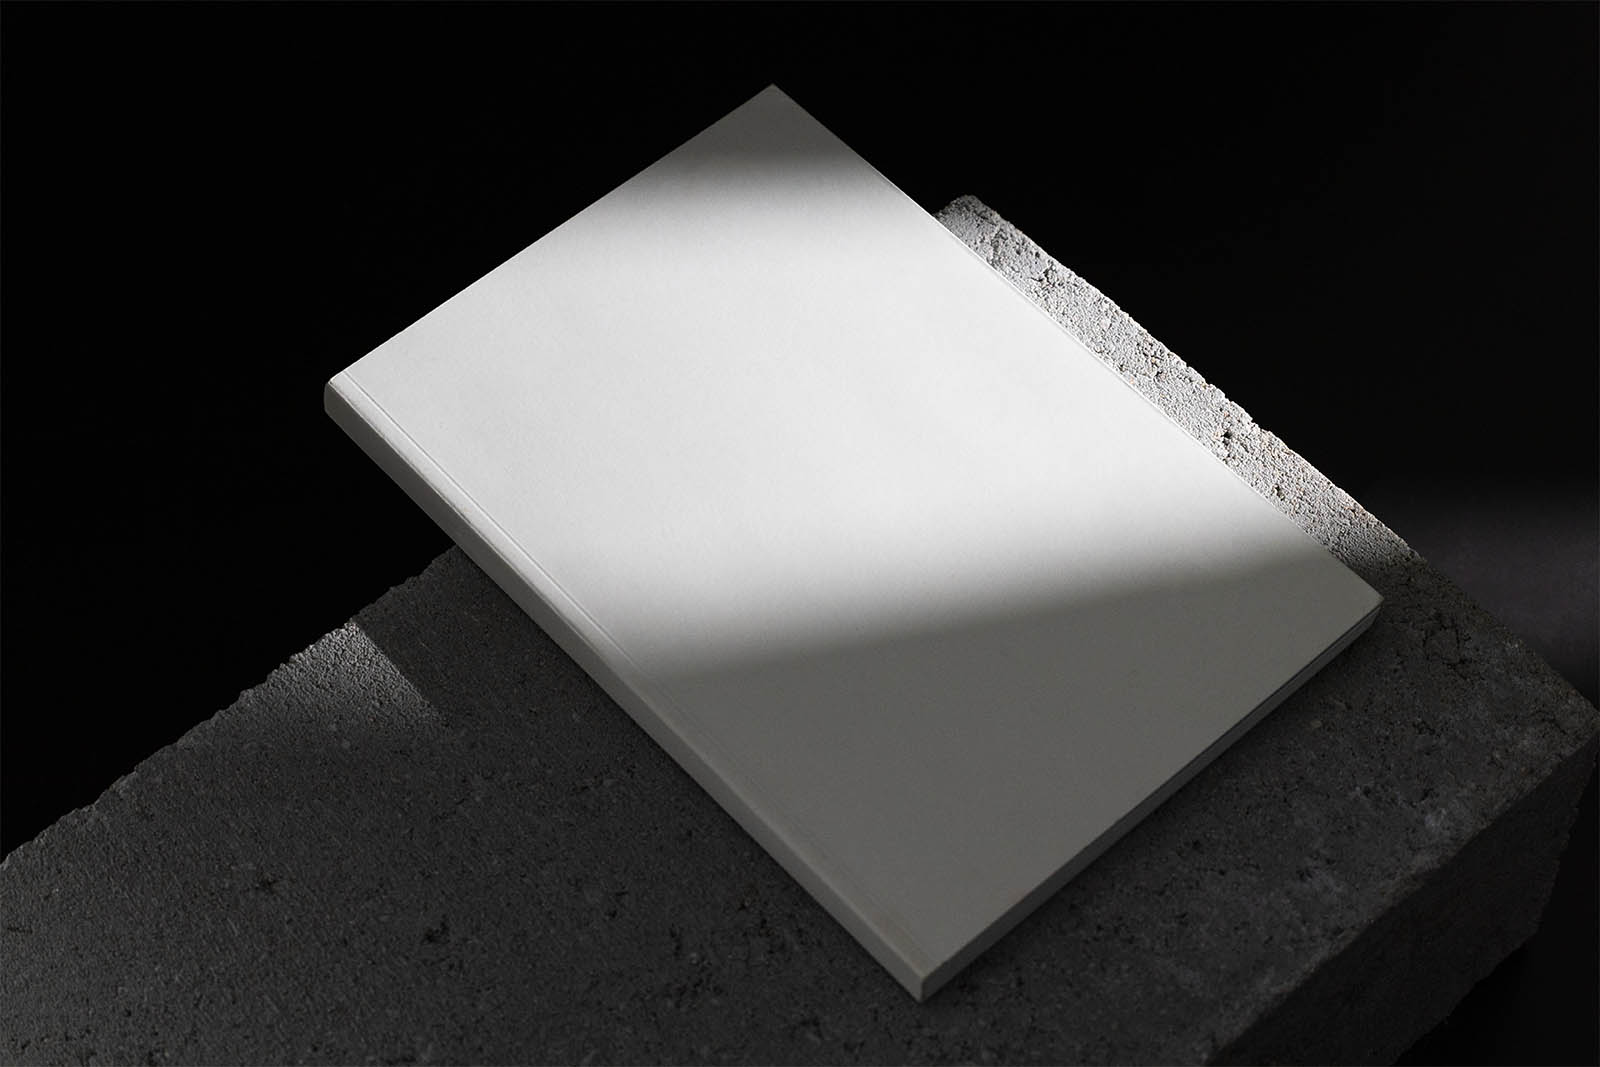 Book on the concrete tile mockup